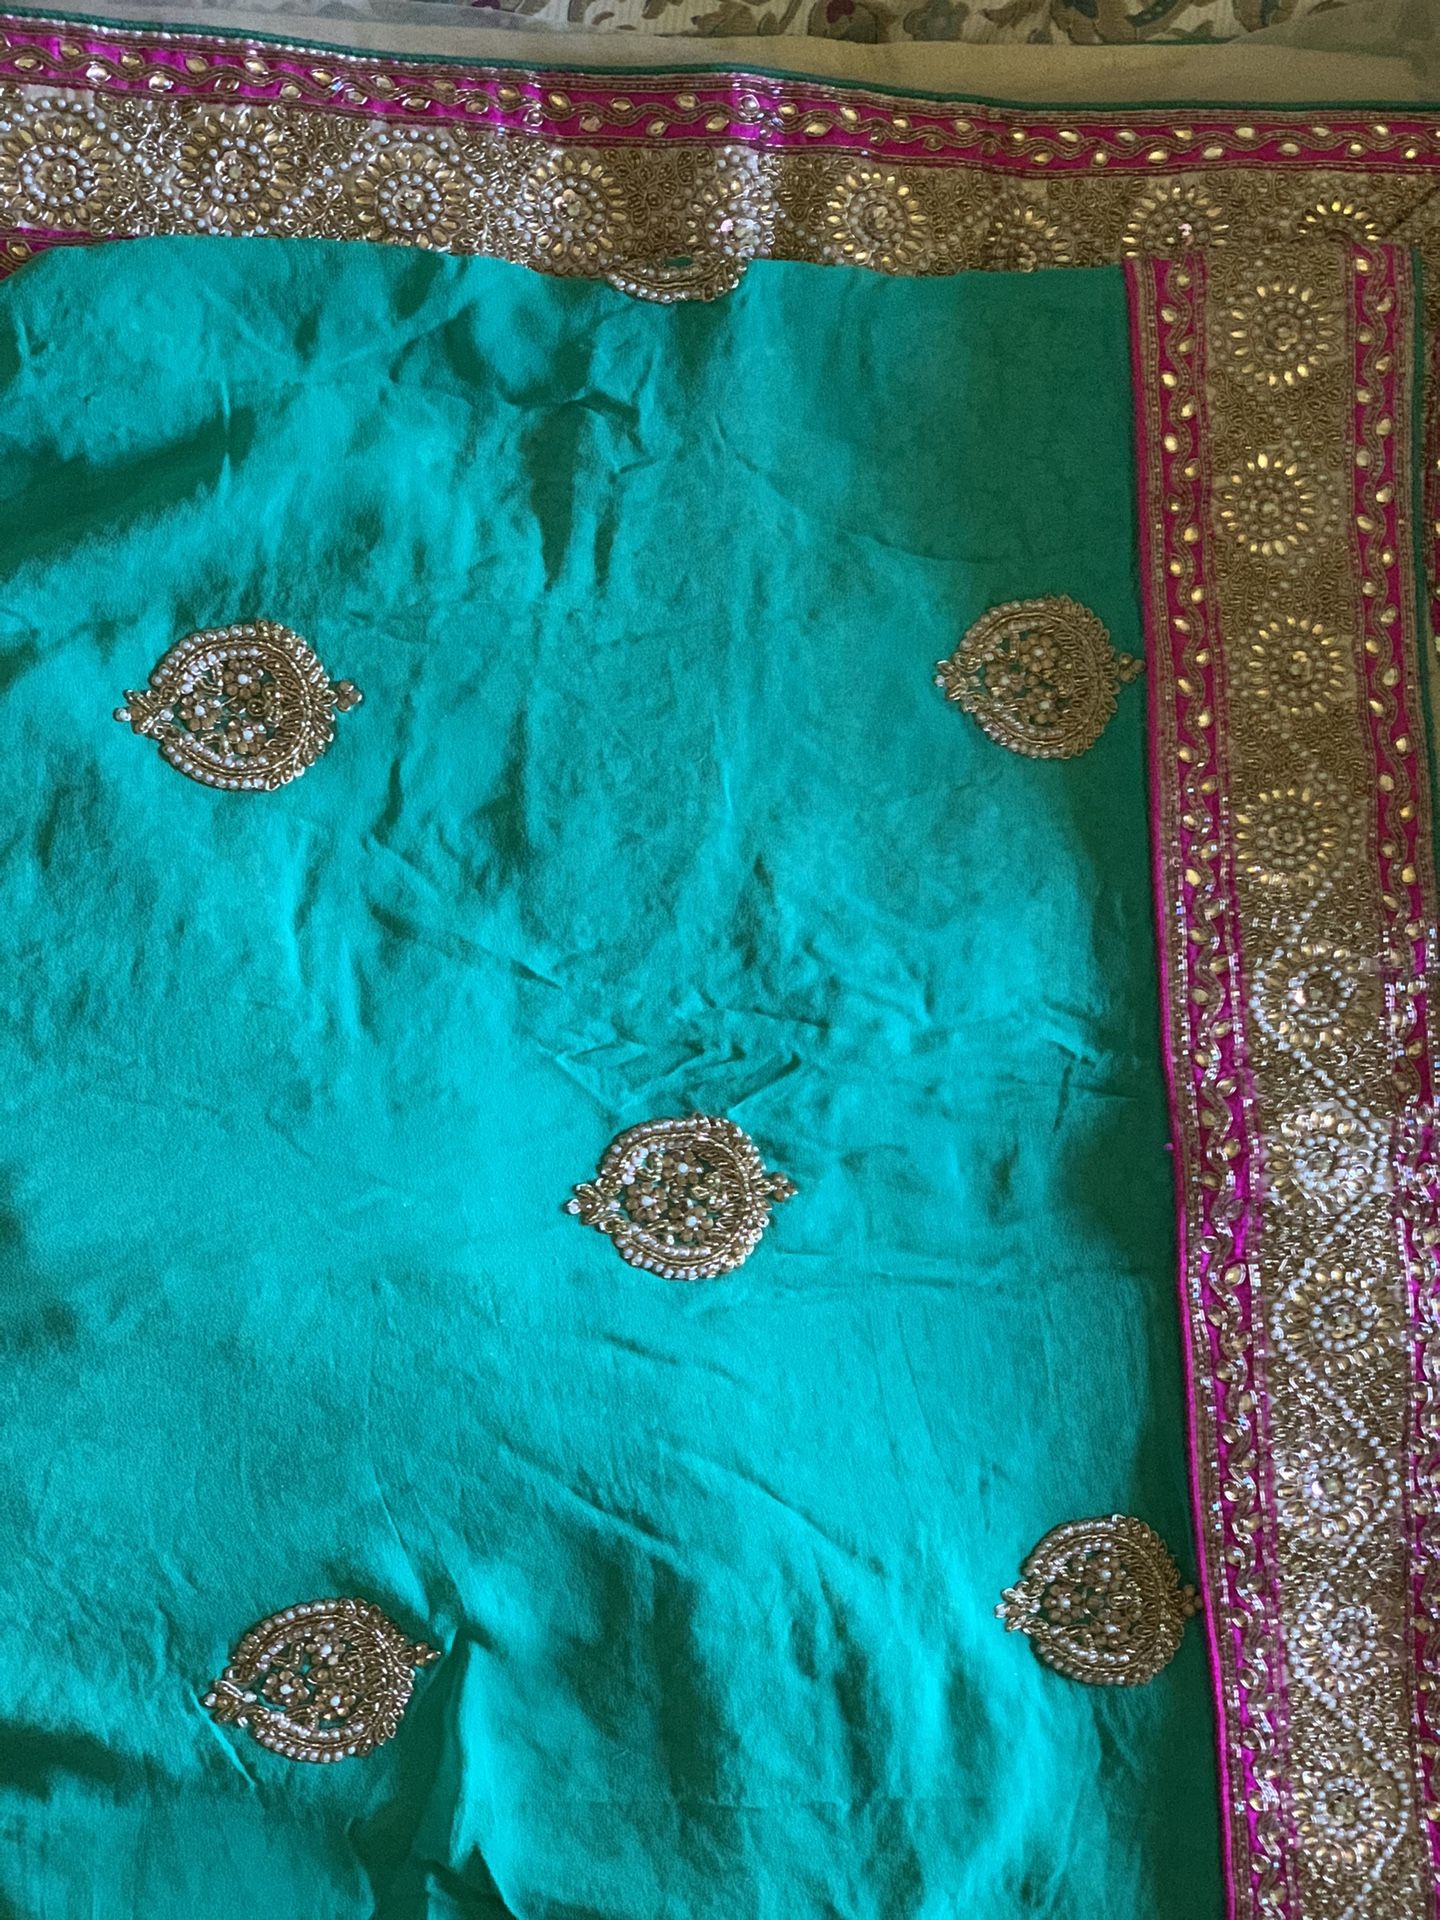 Exquisite Indian Wedding Sari Available for Sale!